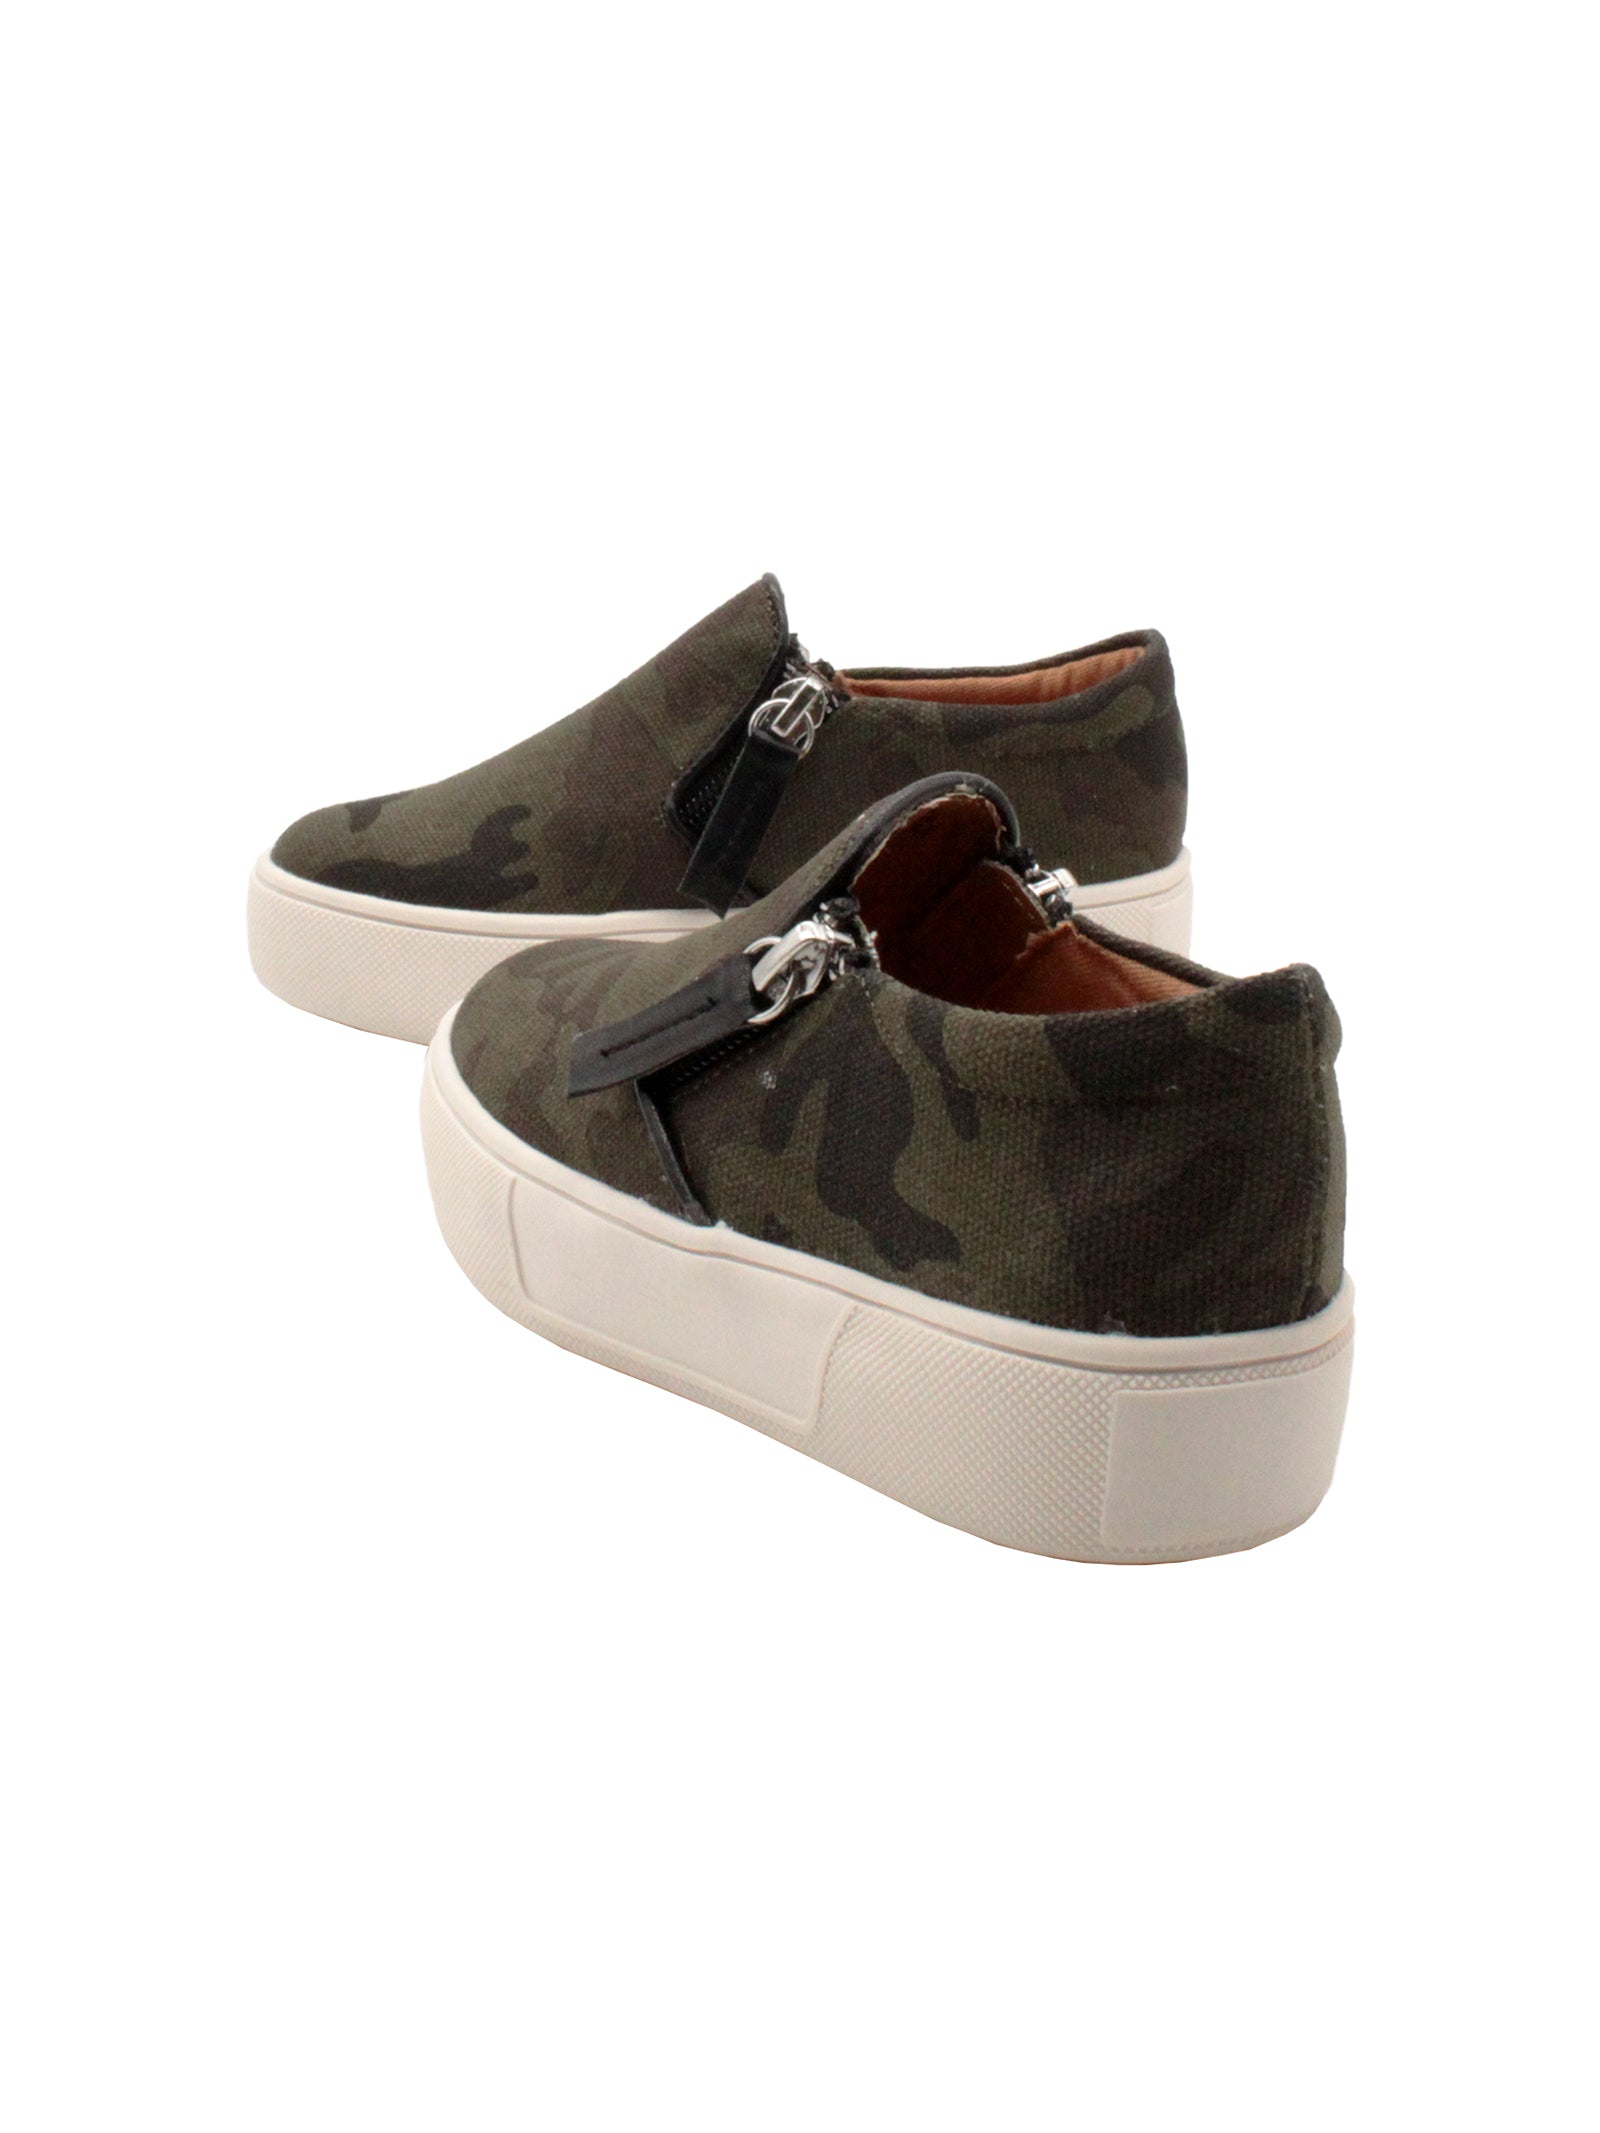 Volatile Kid’s ‘Chorus’ camo double zipper sneaker in printed cotton canvas is designed to easily slip on and off. They feature a cushioned sock stationed on a textured rubber sneaker bottom that’s ready for all day play. Pair them with casual outfits and dress up looks alike. back